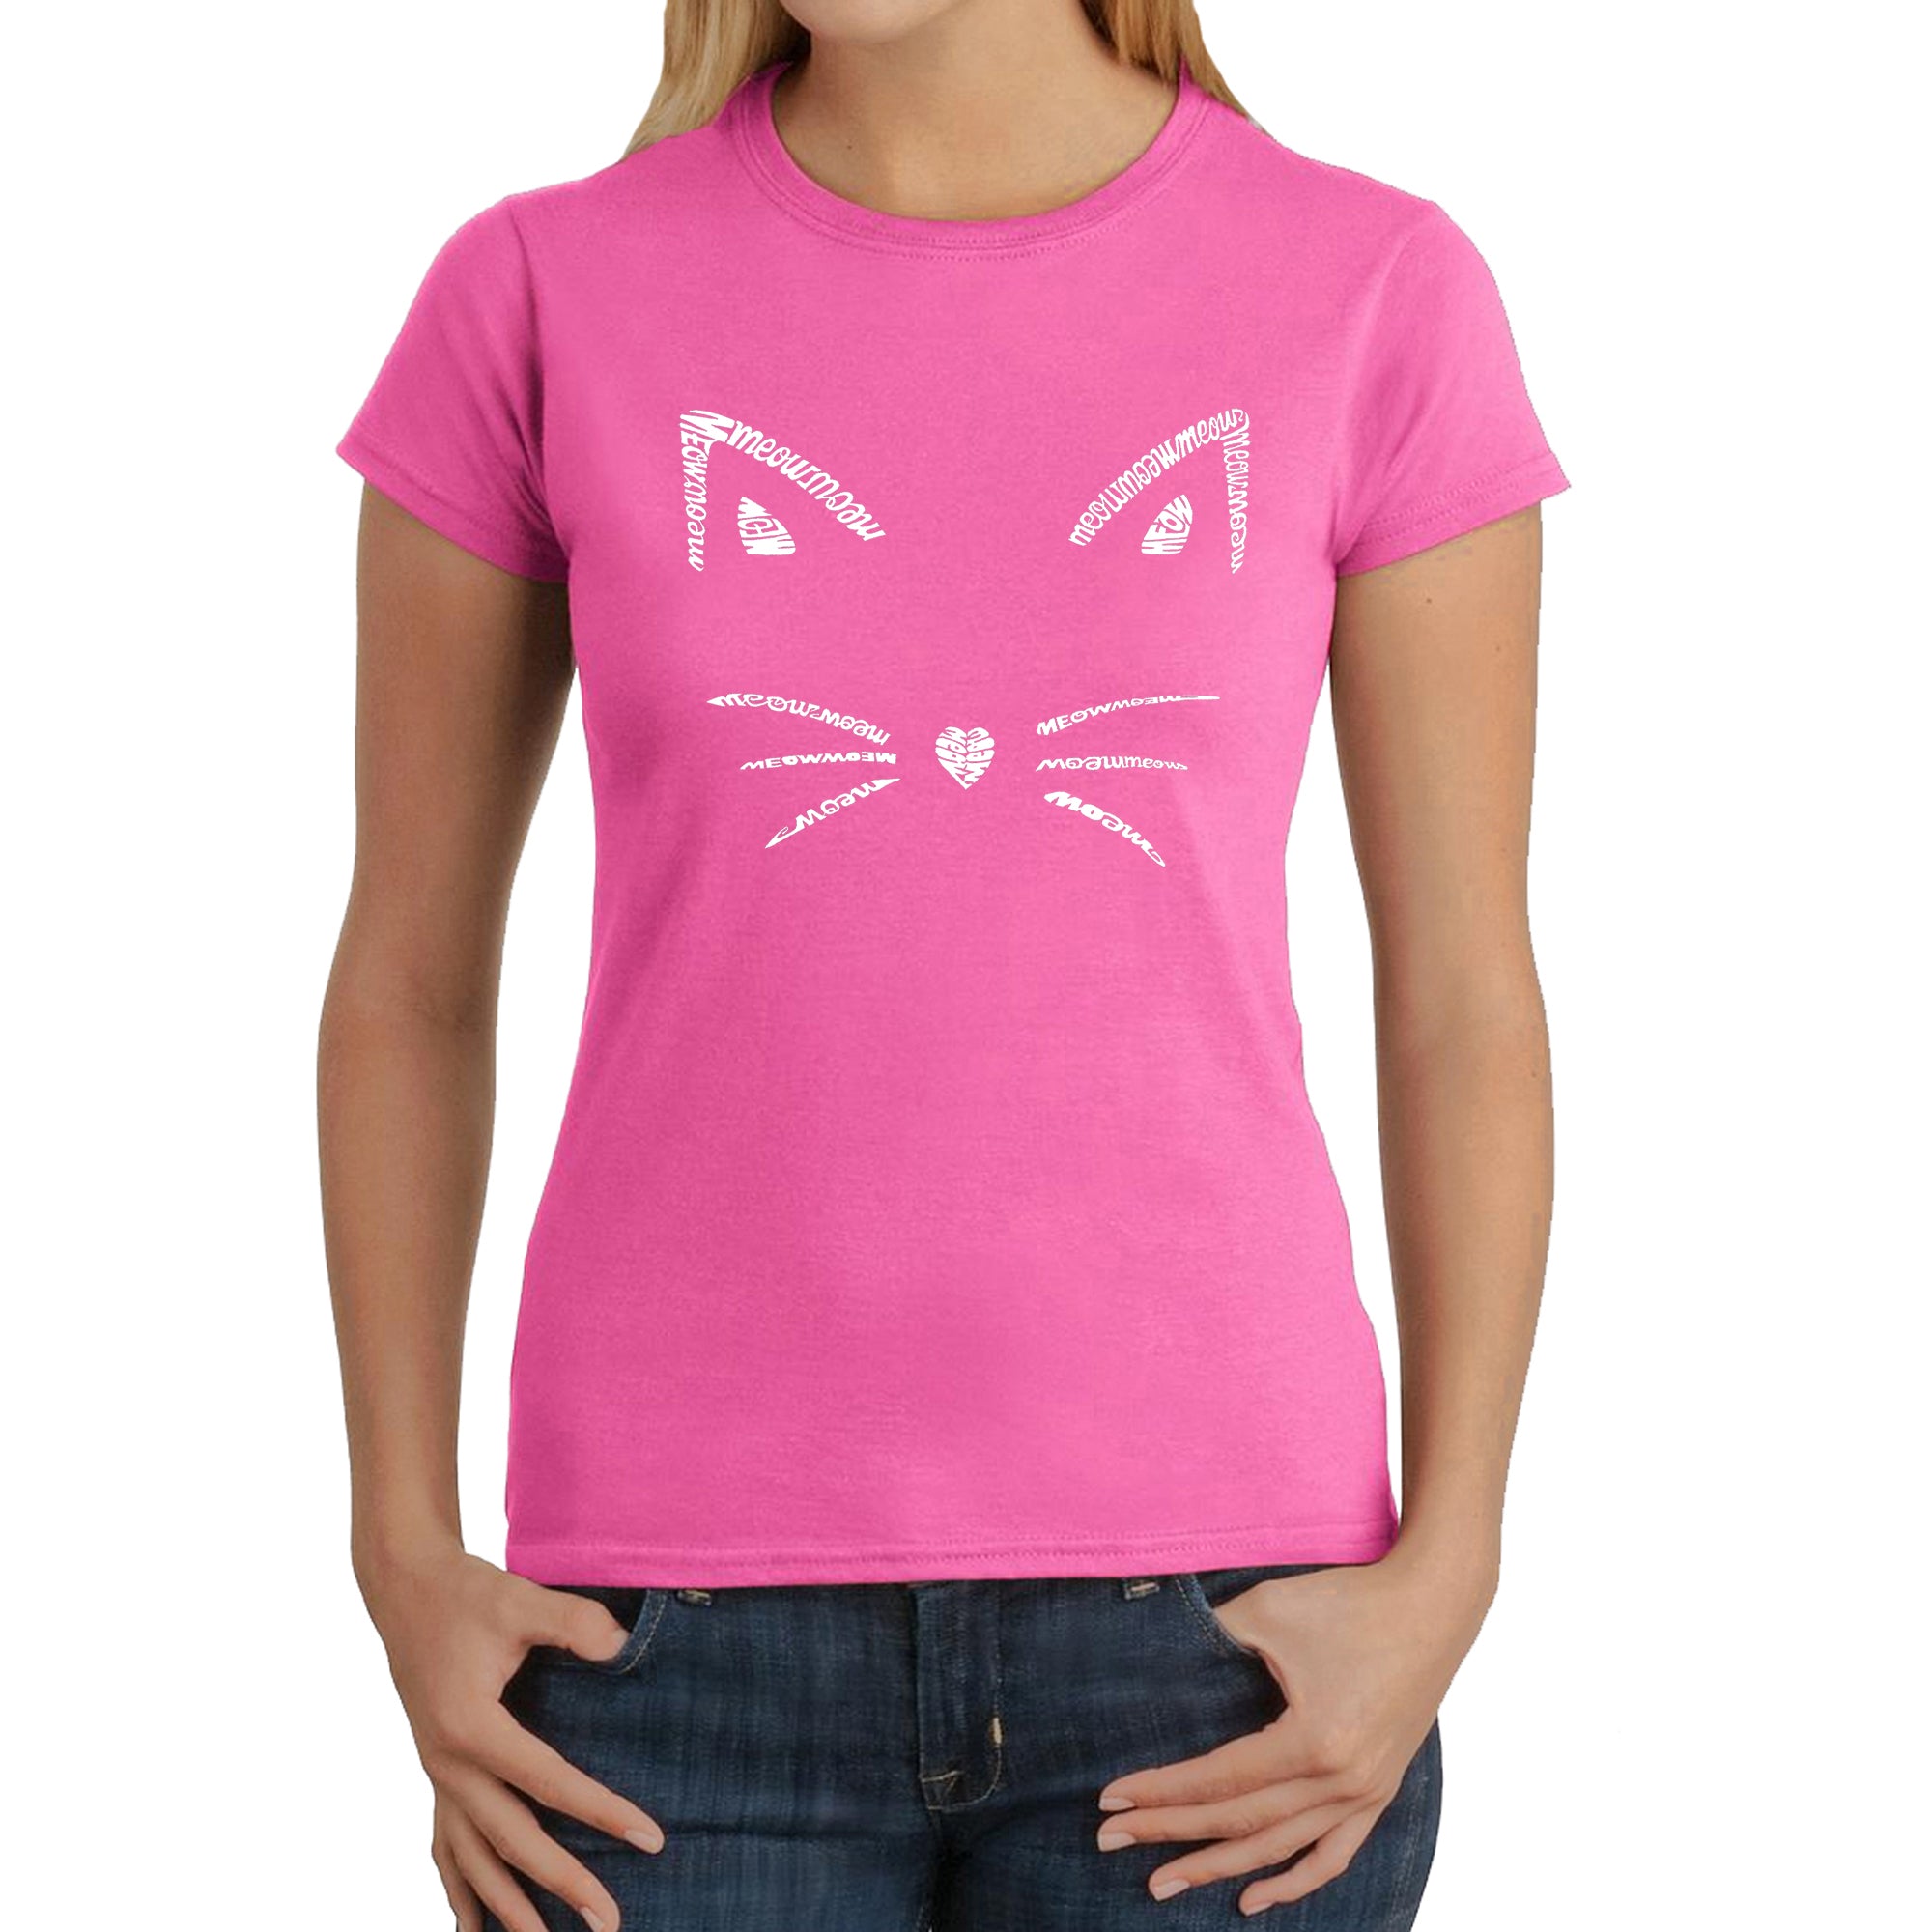 Whiskers - Women's Word Art T-Shirt - Pink - X-Large